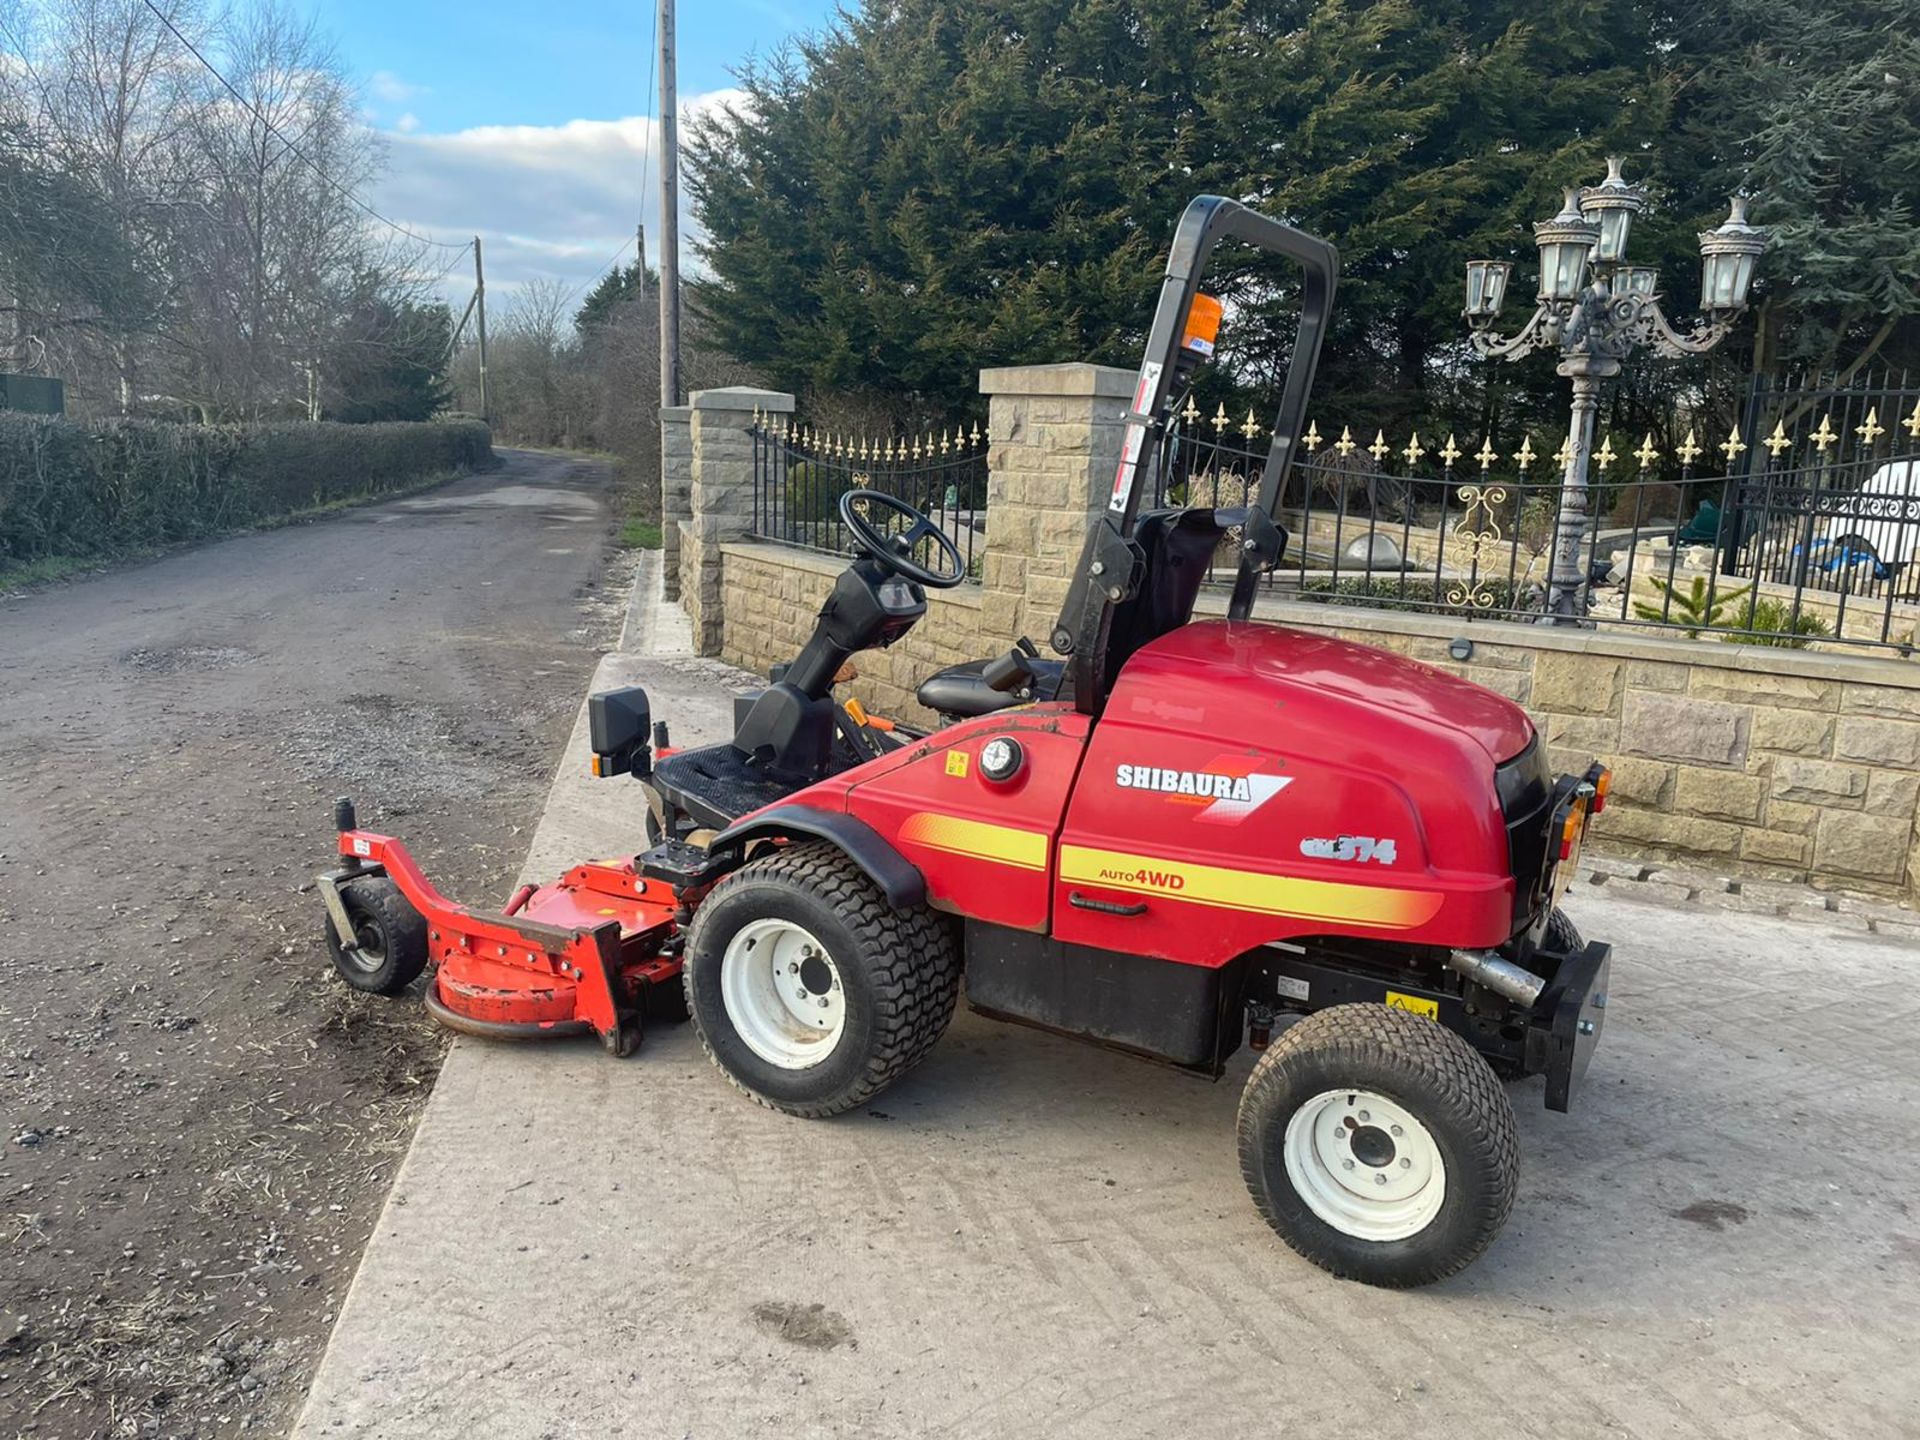 2012 SHIBAURA CM374 OUTFRONT RIDE ON MOWER, RUNS, DRIVES AND CUTS, IN USED BUT GOOD CONDITION - Image 10 of 12